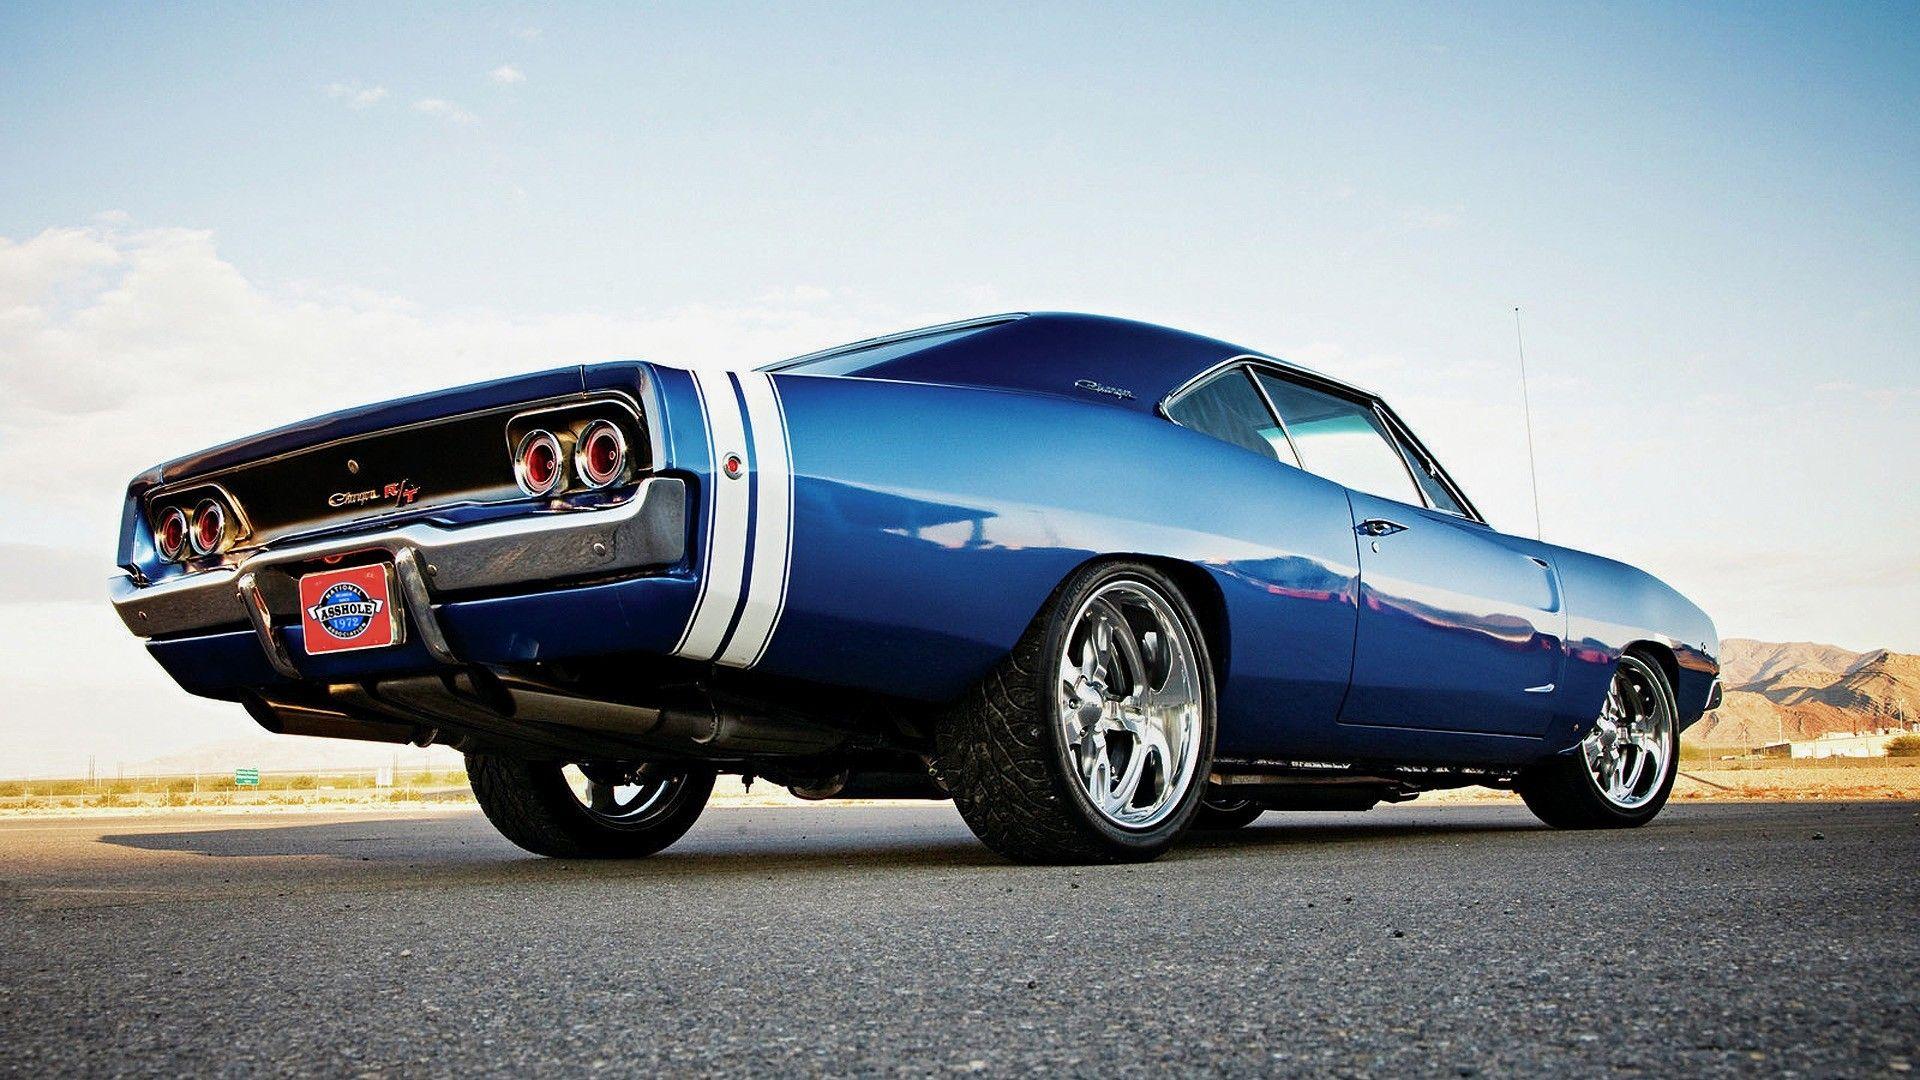 Wallpaper.wiki Blue 1970 Dodge Charger Background Free PIC WPD006126